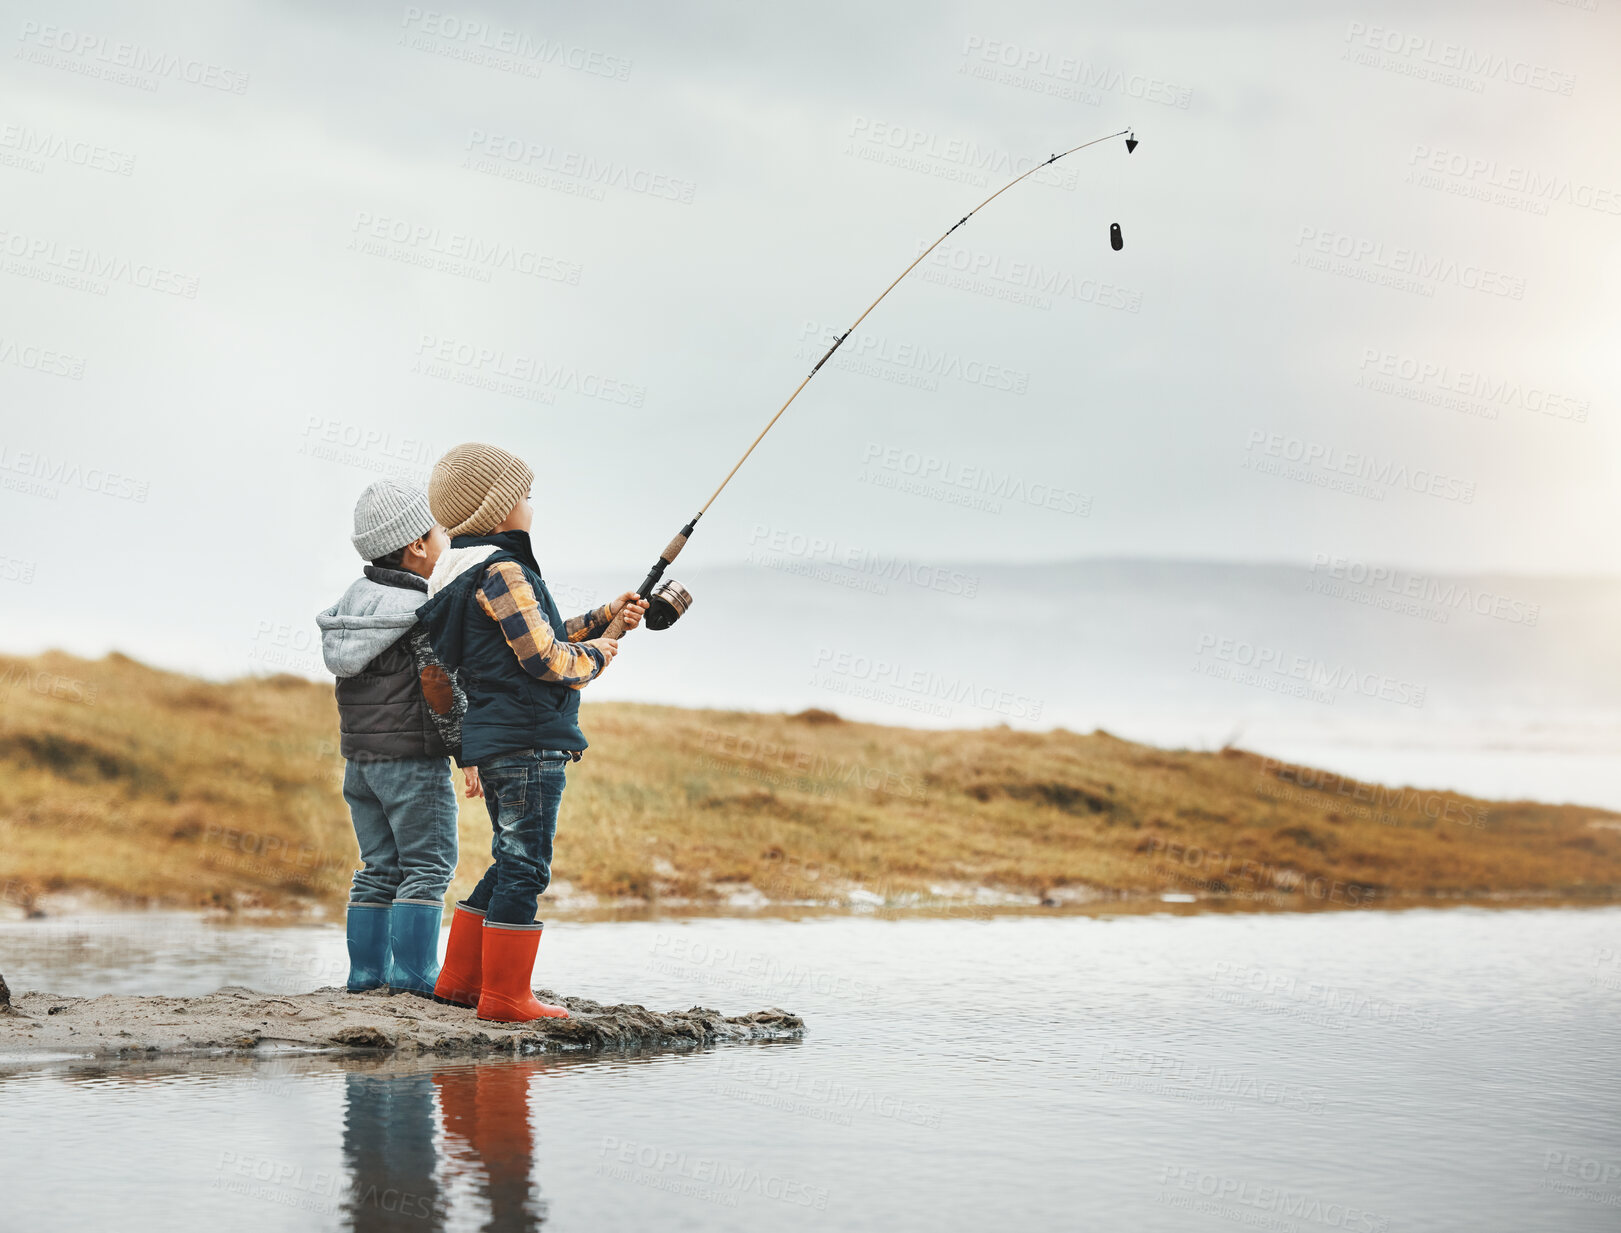 Buy stock photo Lake, activity and children fishing while on vacation, adventure or weekend trip for a hobby. Outdoor, nature and boy siblings or kids catching fish in water together while on holiday in countryside.